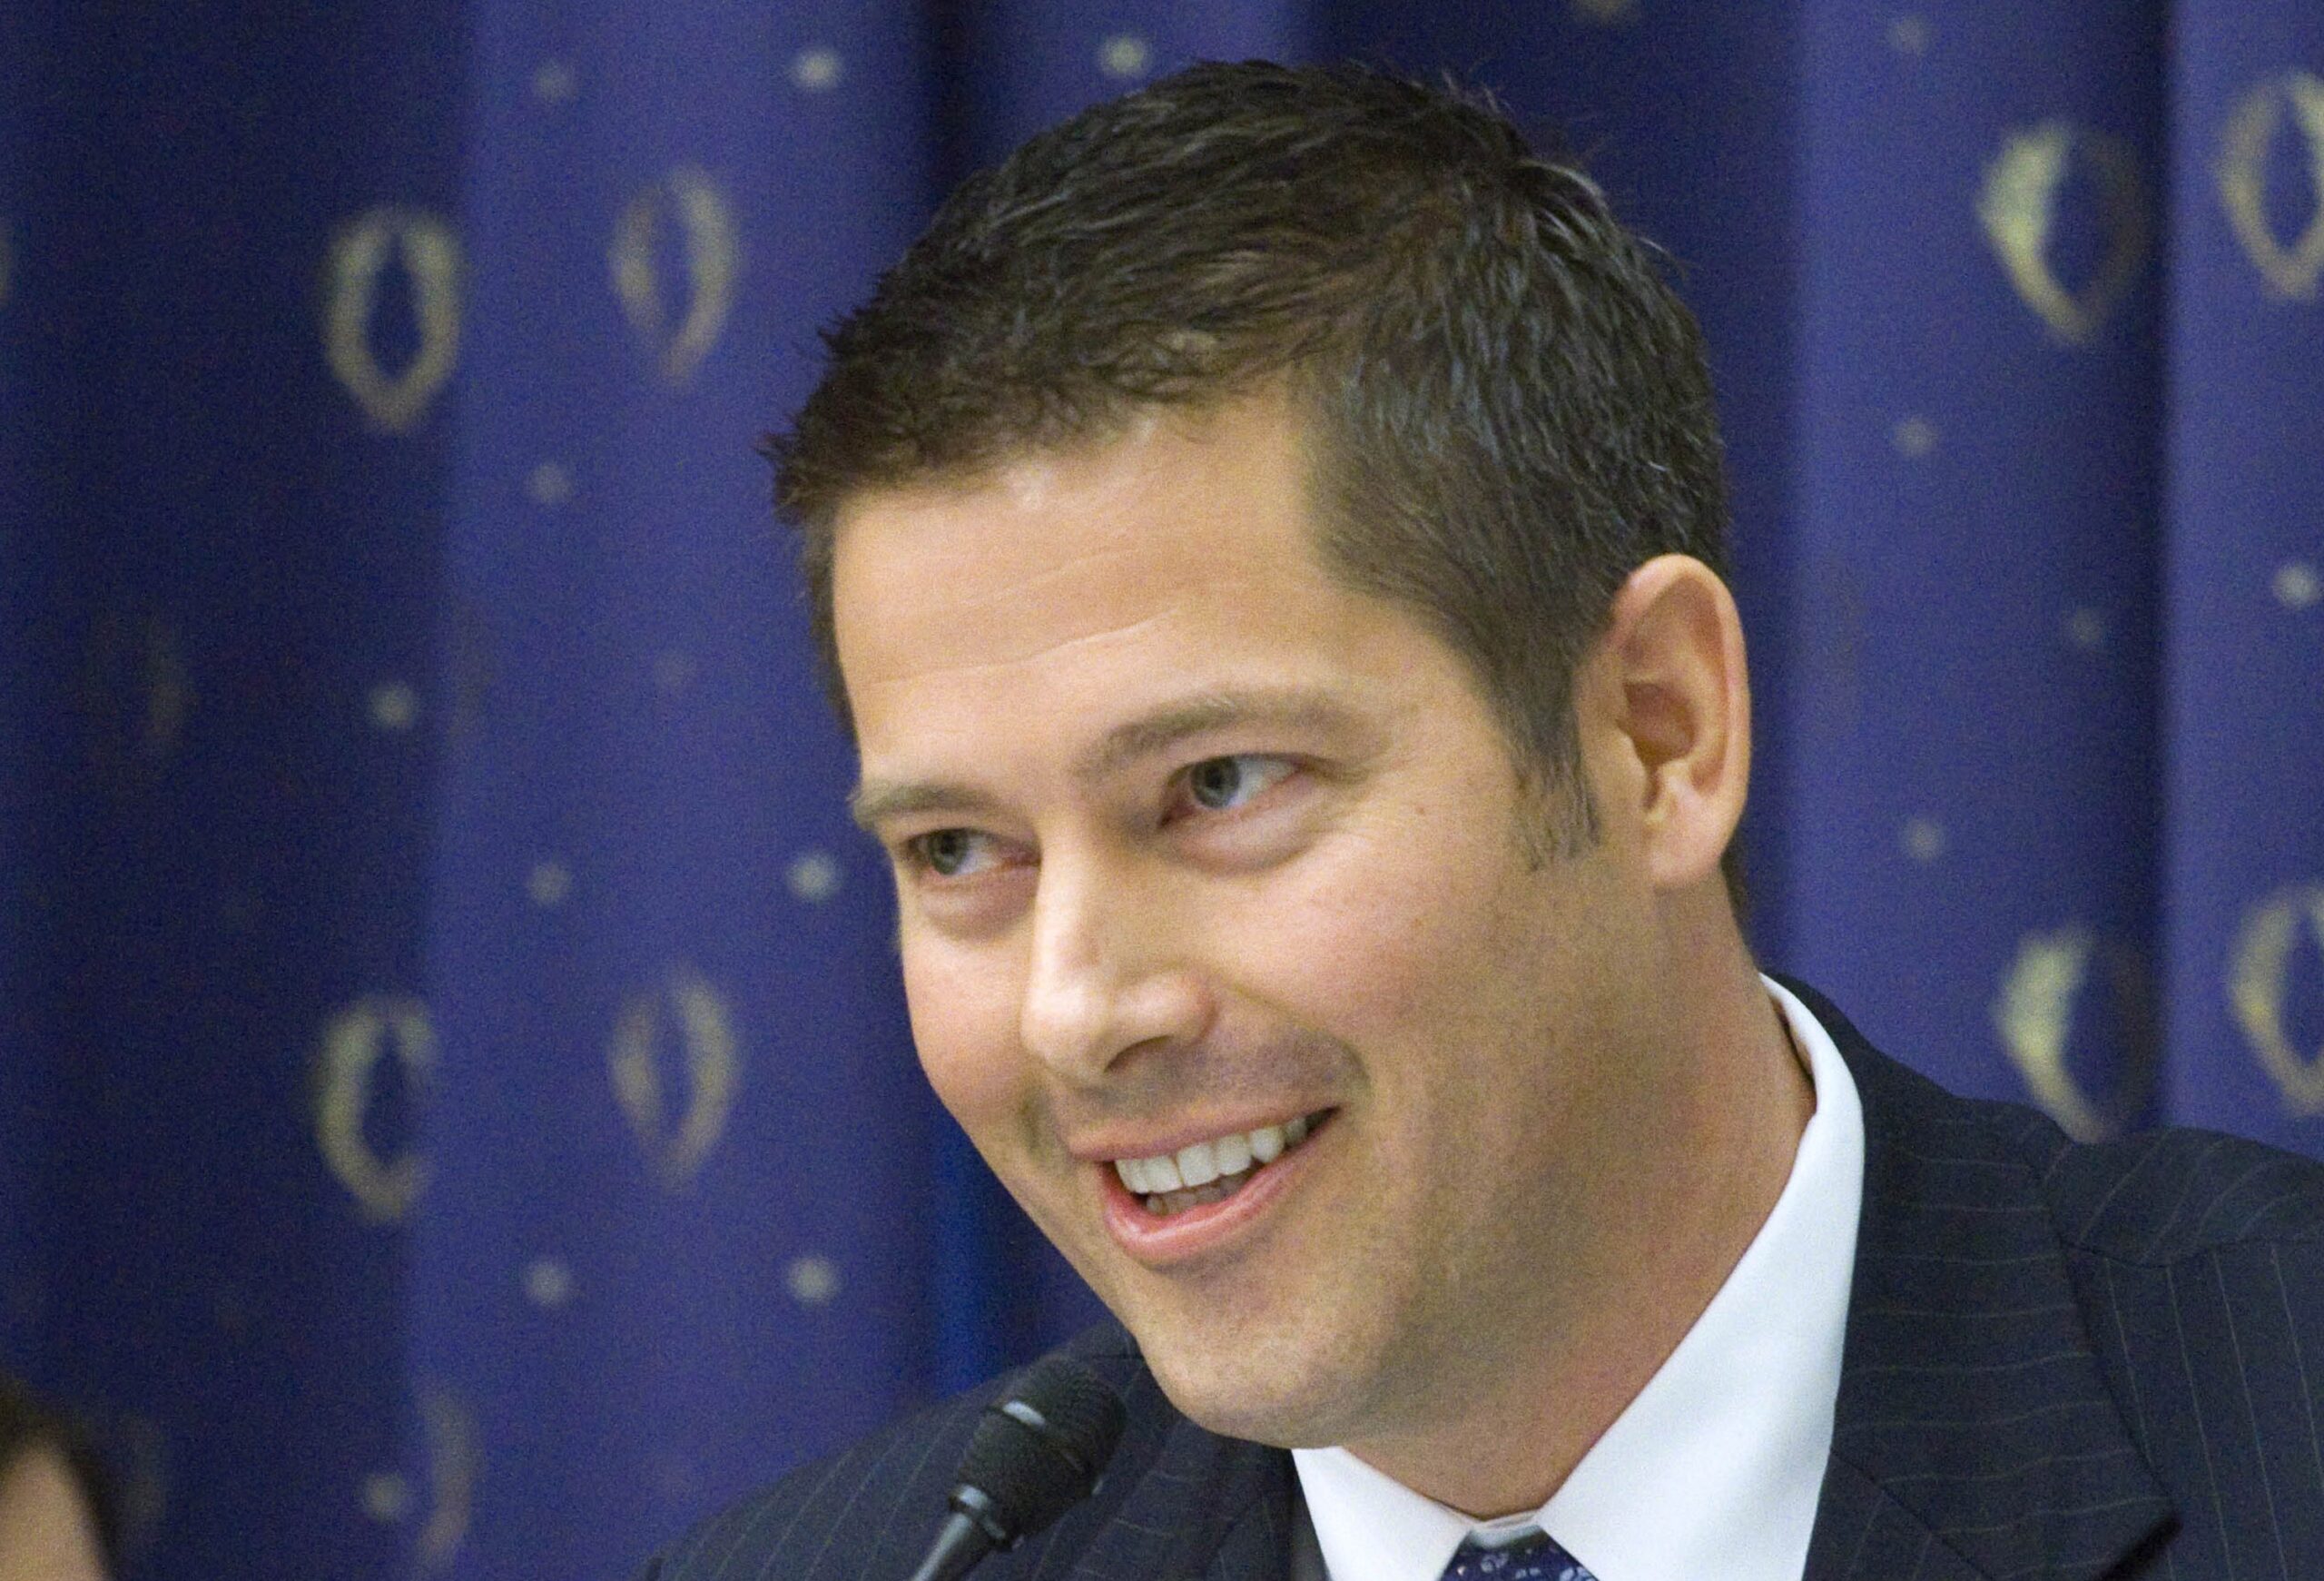 Rep. Sean Duffy Criticized For Remarks On Different Forms Of Extremism